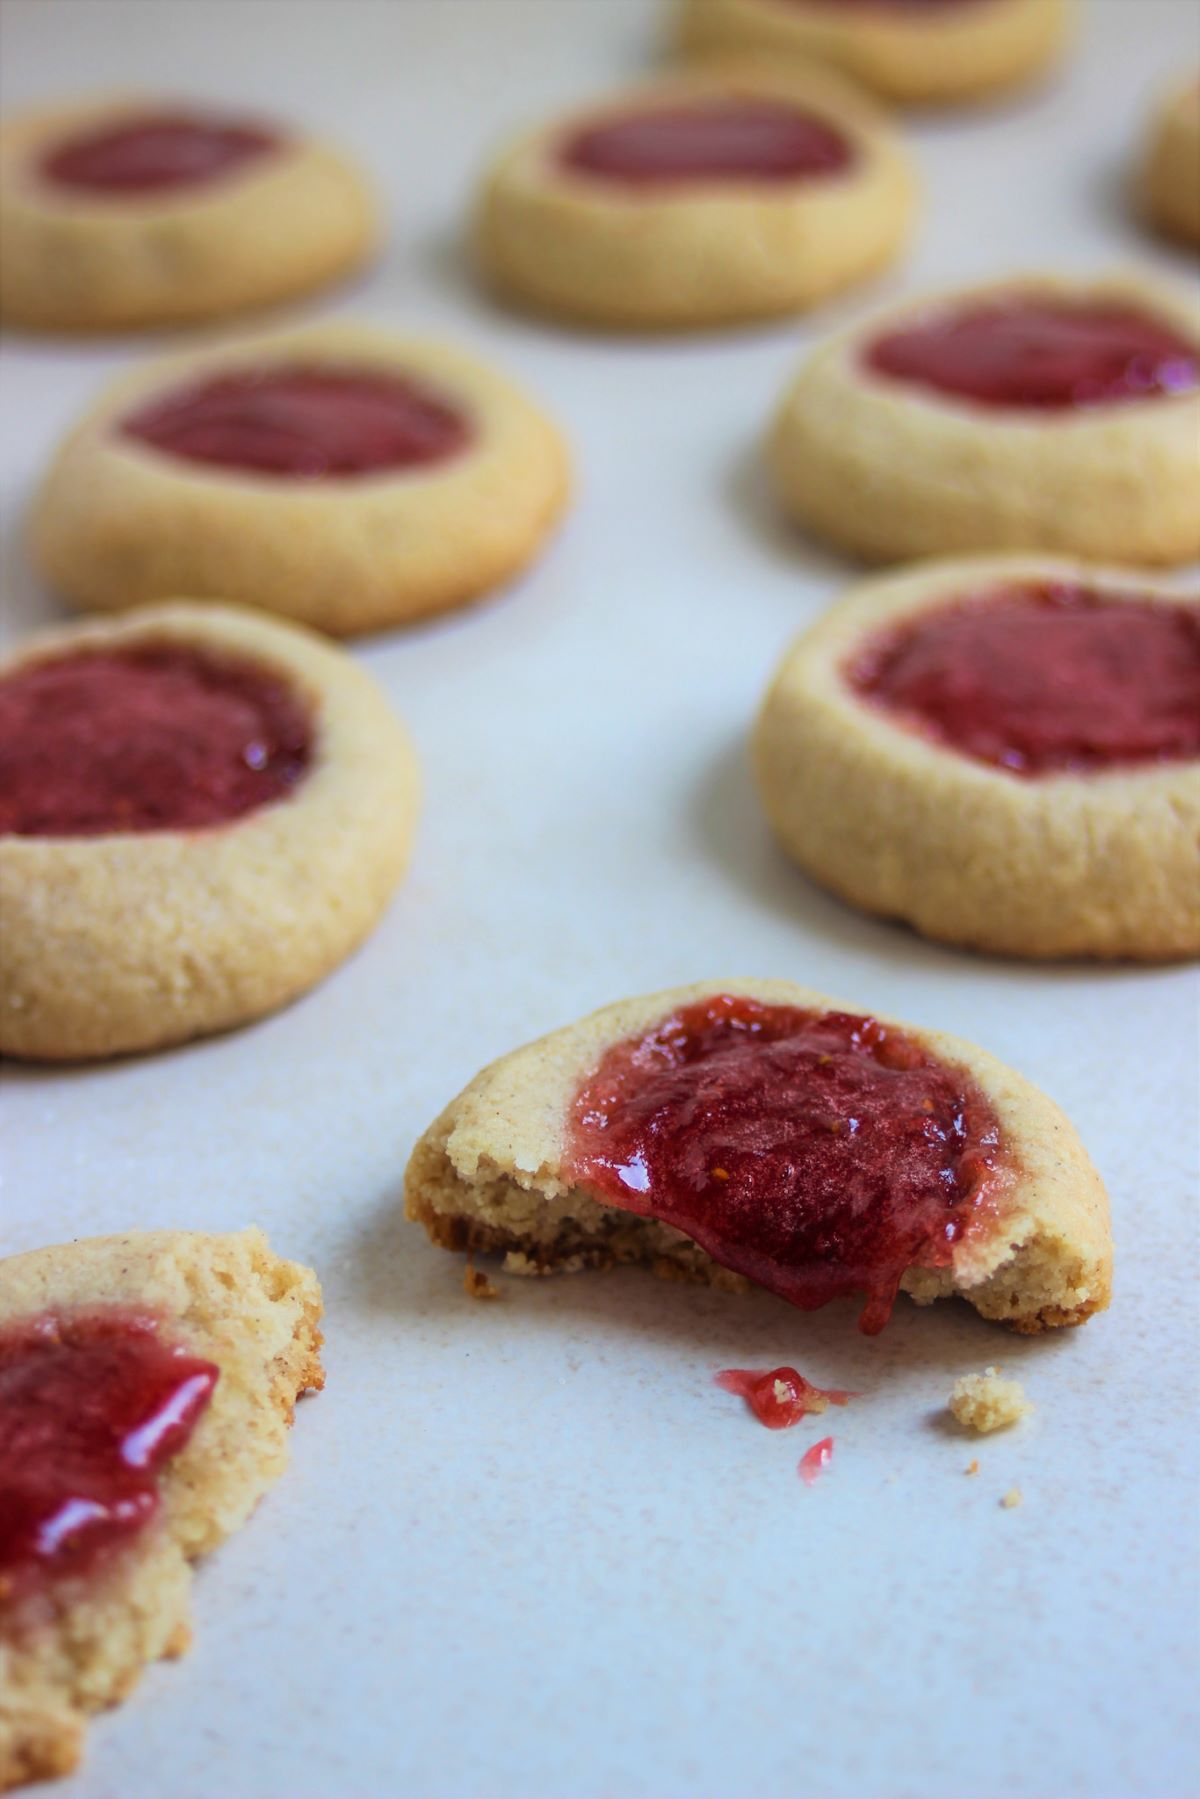 Many thumbprint cookies, one has broken and the strawberry jam falls off.